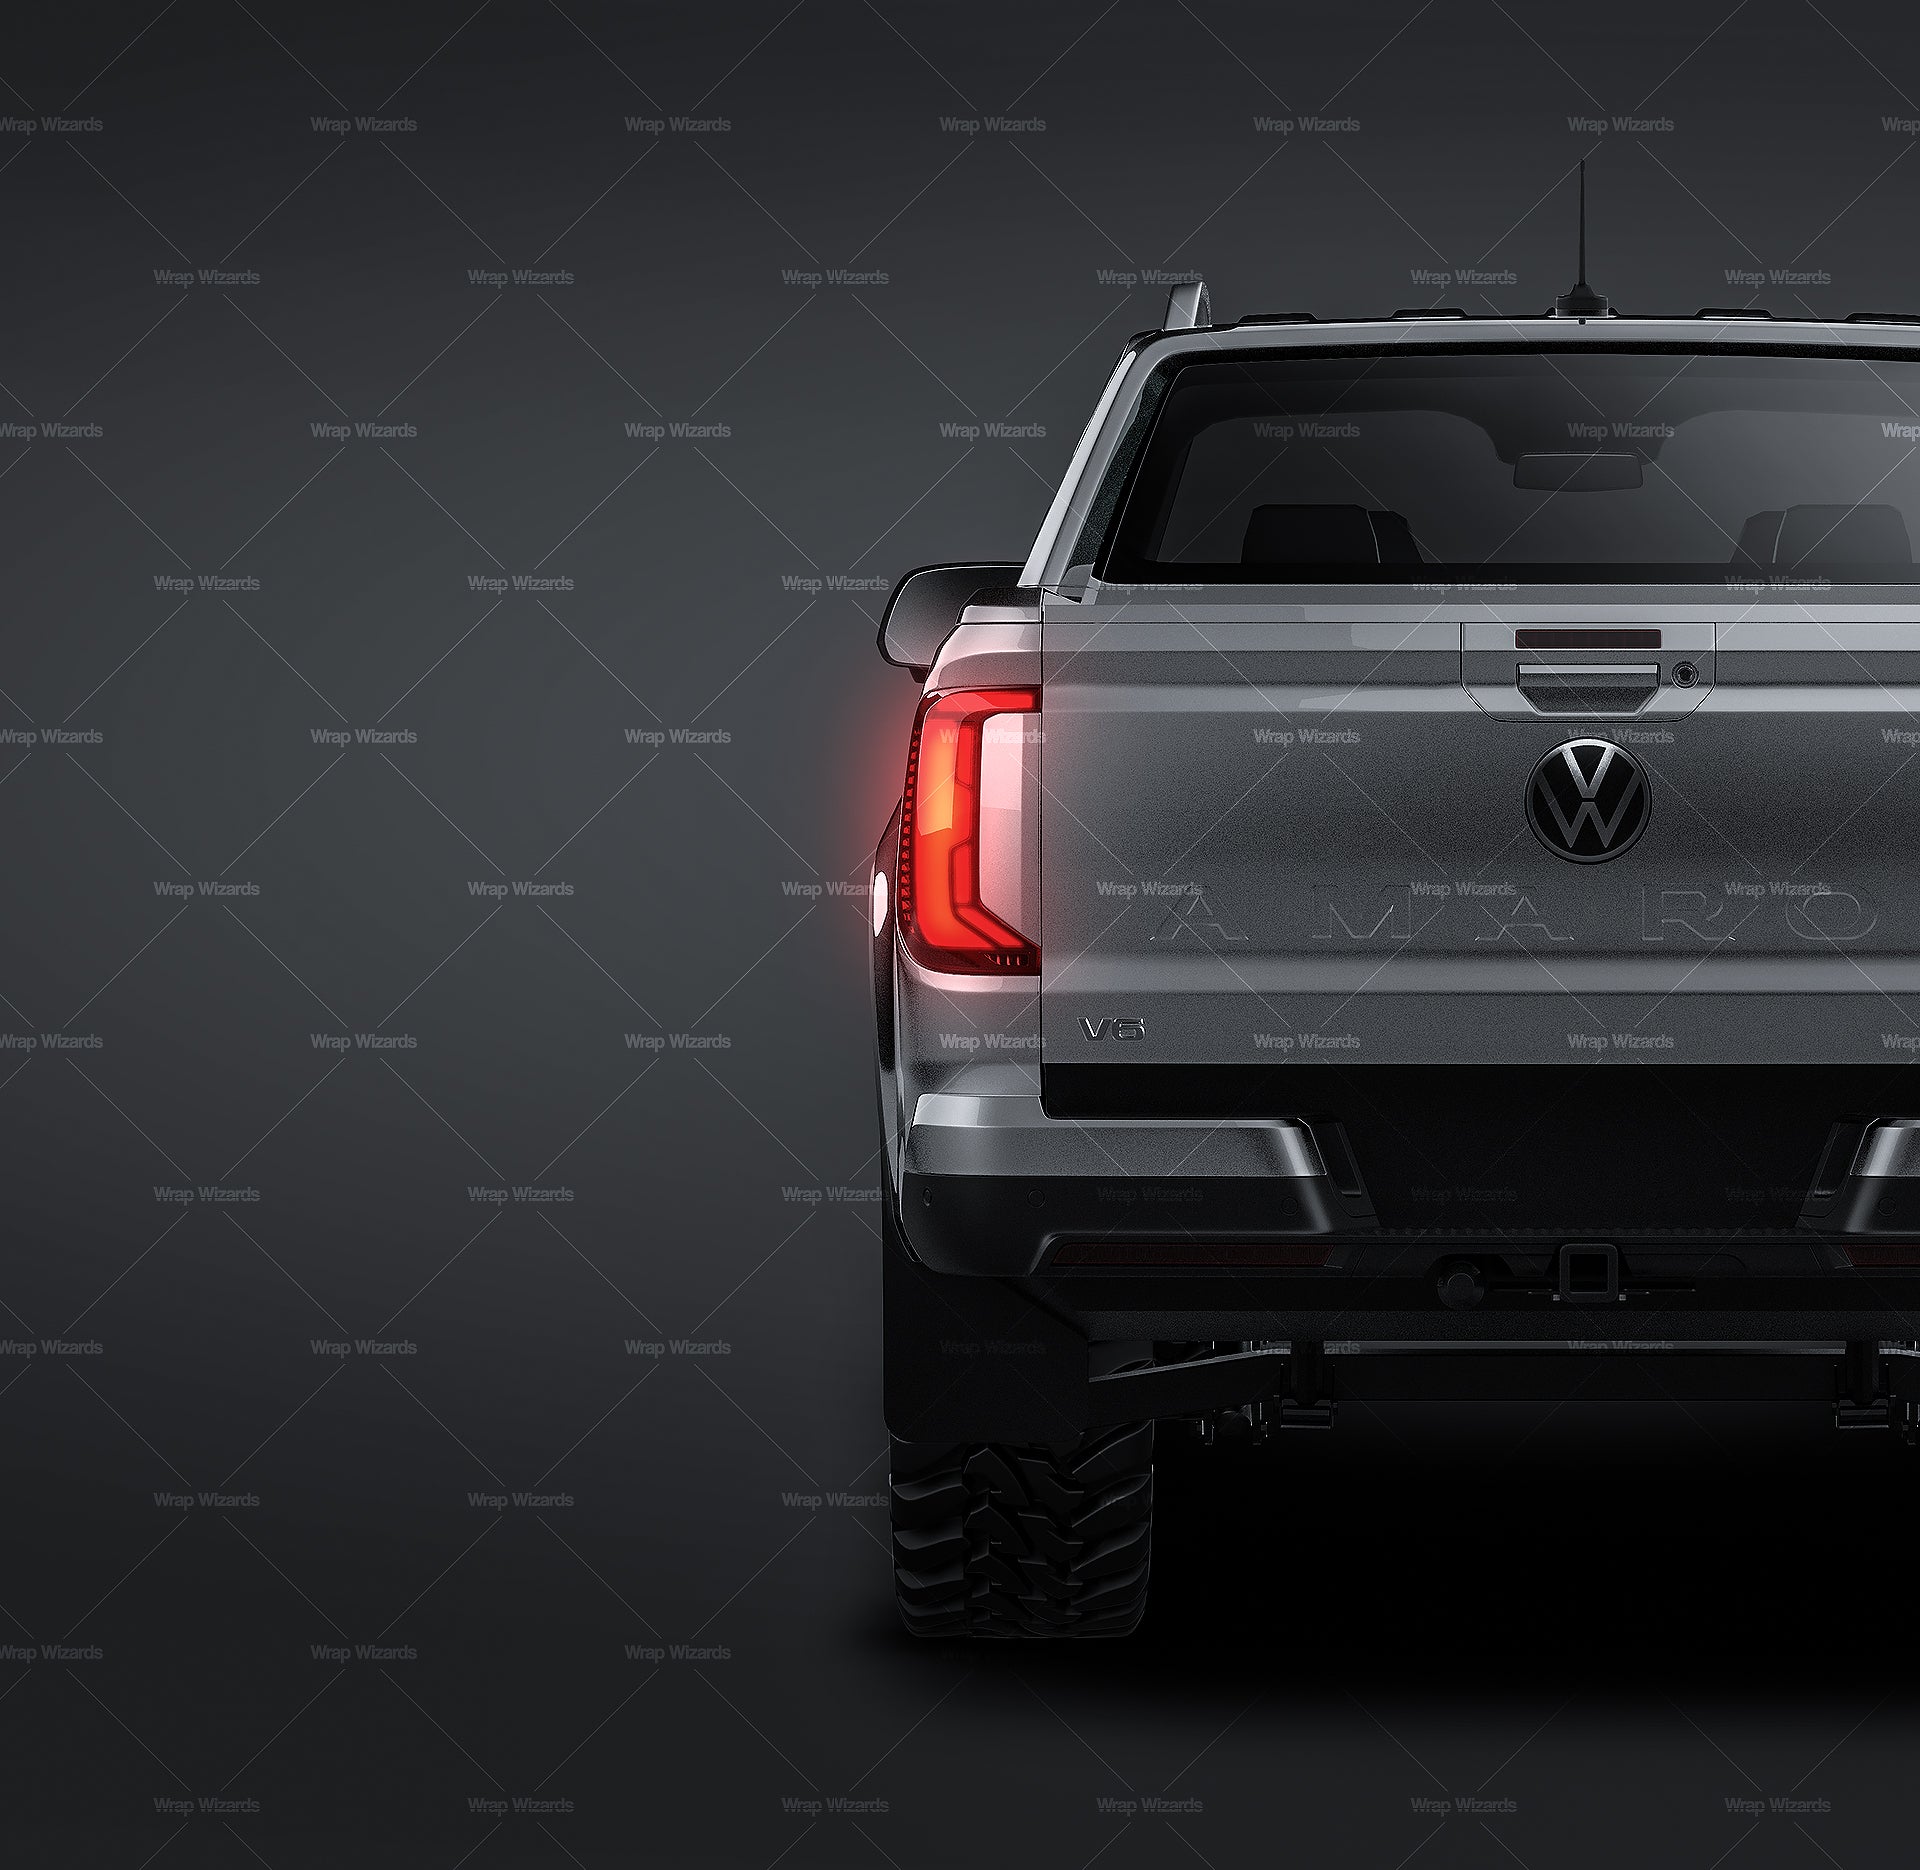 Volkswagen Amarok Aventura 2023 double cab glossy finish - all sides Car Mockup Template.psd